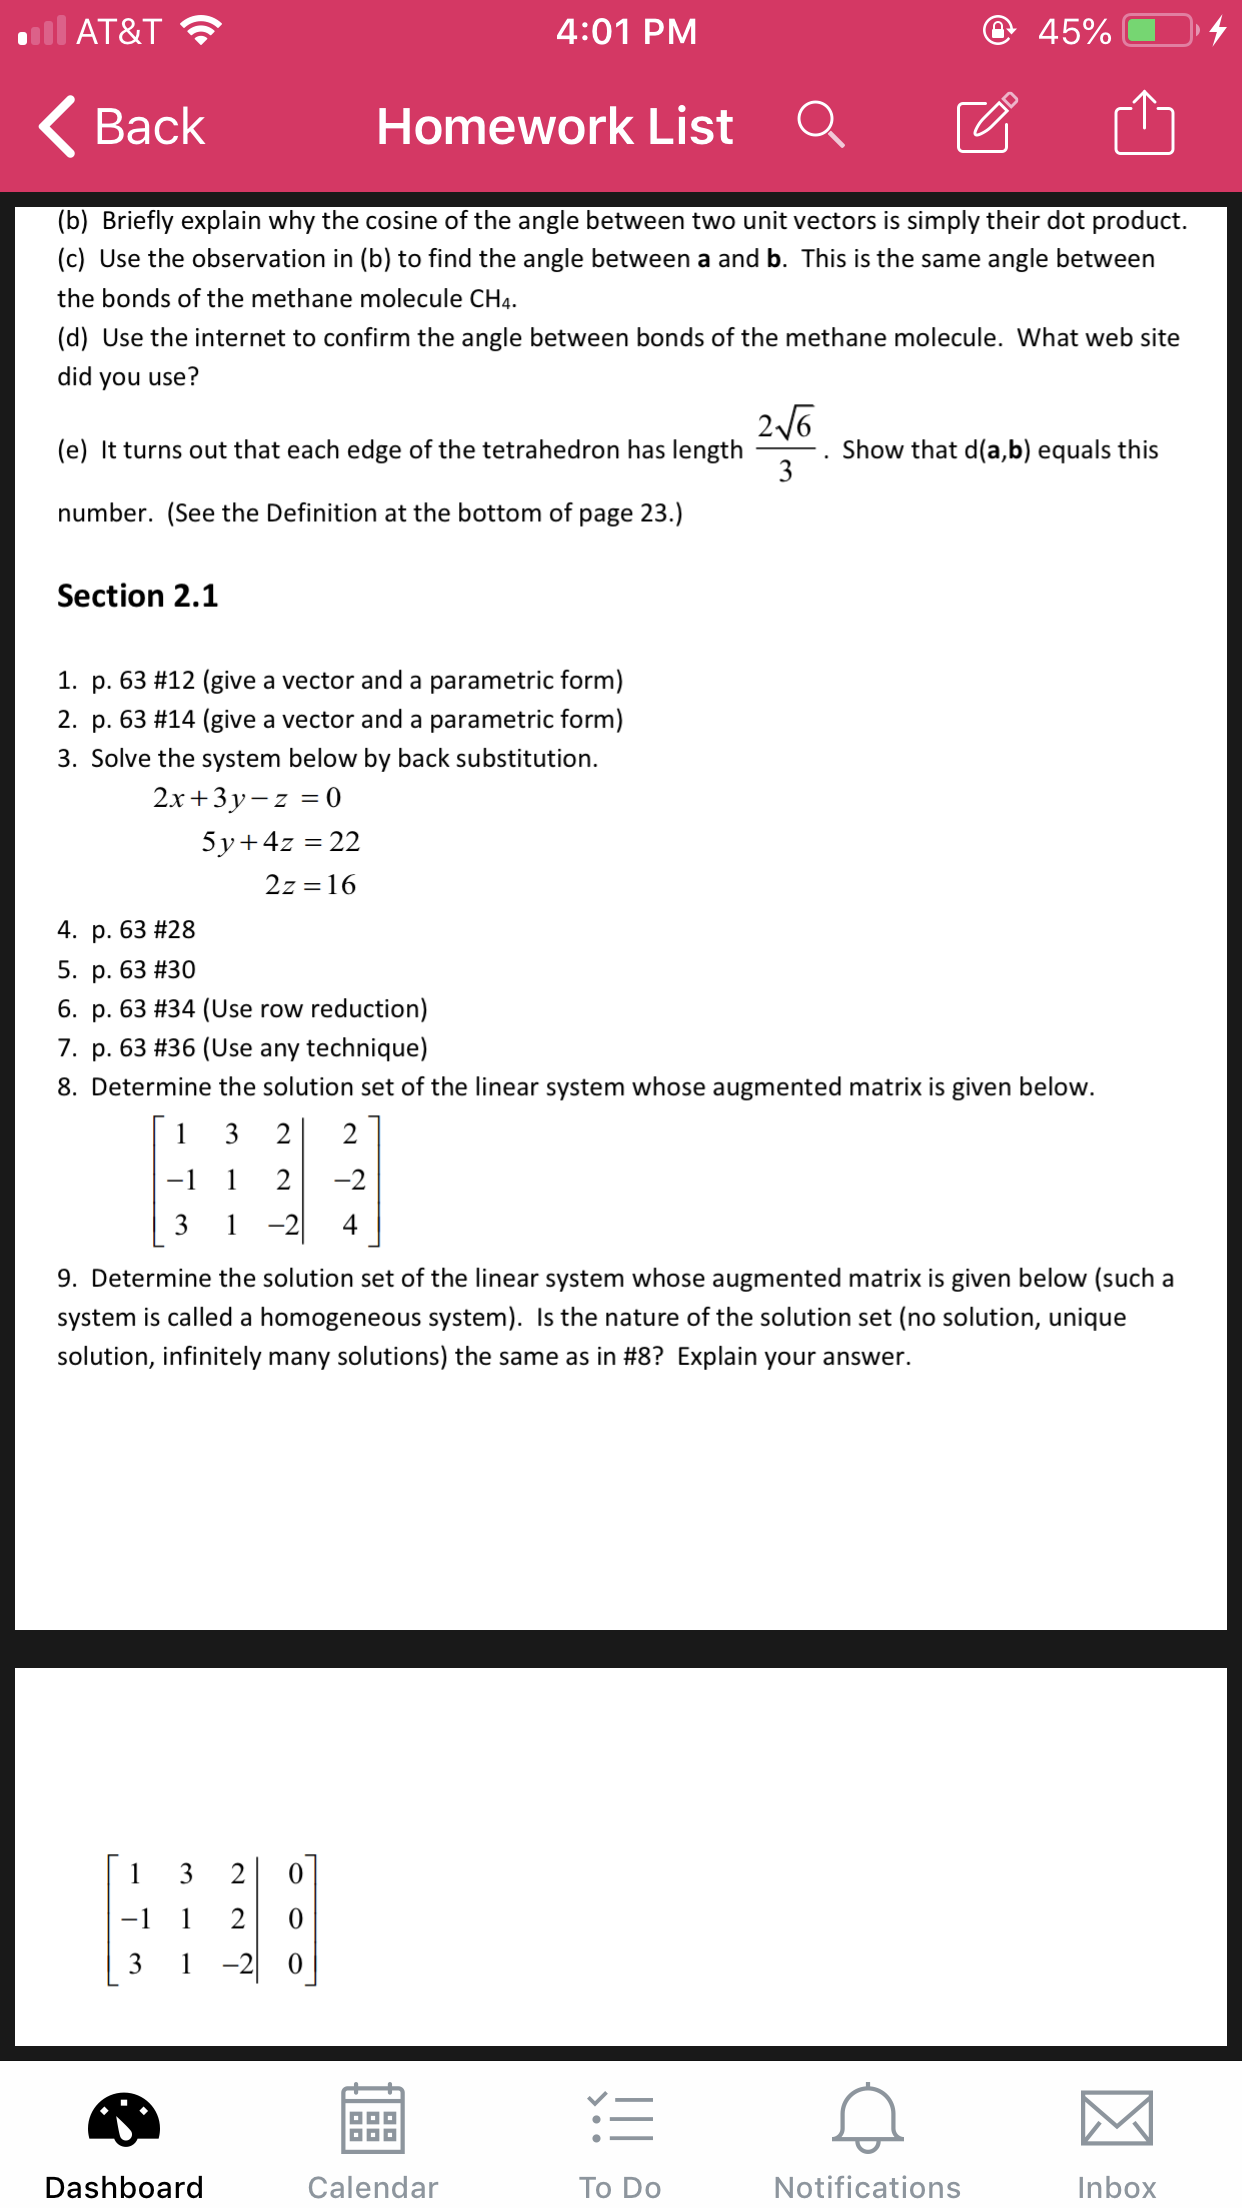 @ 45%
AT&T
4:01 PM
Homework List
Вack
(b) Briefly explain why the cosine of the angle between two unit vectors is simply their dot product.
(c) Use the observation in (b) to find the angle between a and b. This is the same angle between
the bonds of the methane molecule CH4
(d) Use the internet to confirm the angle between bonds of the methane molecule. What web site
did you use?
26
Show that d(a,b) equals this
3
(e) It turns out that each edge of the tetrahedron has length
number. (See the Definition at the bottom of page 23.)
Section 2.1
1. p. 63 #12 (give a vector and a parametric form)
2. p. 63 #14 (give a vector and a parametric form)
3. Solve the system below by back substitution
2.x+3y-z0
5y 4z 22
2z 16
4. p. 63 # 28
5. p. 63 #30
6. p. 63 #34 (Use row reduction)
7. p. 63 #36 (Use any technique)
8. Determine the solution set of the linear system whose augmented matrix is given below.
3
2
2
1
2
-2
-1
-2|
3
1
4
9. Determine the solution set of the linear system whose augmented matrix is given below (such a
system is called a homogeneous system). Is the nature of the solution set (no solution, unique
solution, infinitely many solutions) the same as in #8? Explain your answer.
1
3
2
-1
1
2
1-20
Notifications
Dashboard
Calendar
To Do
Inbox
